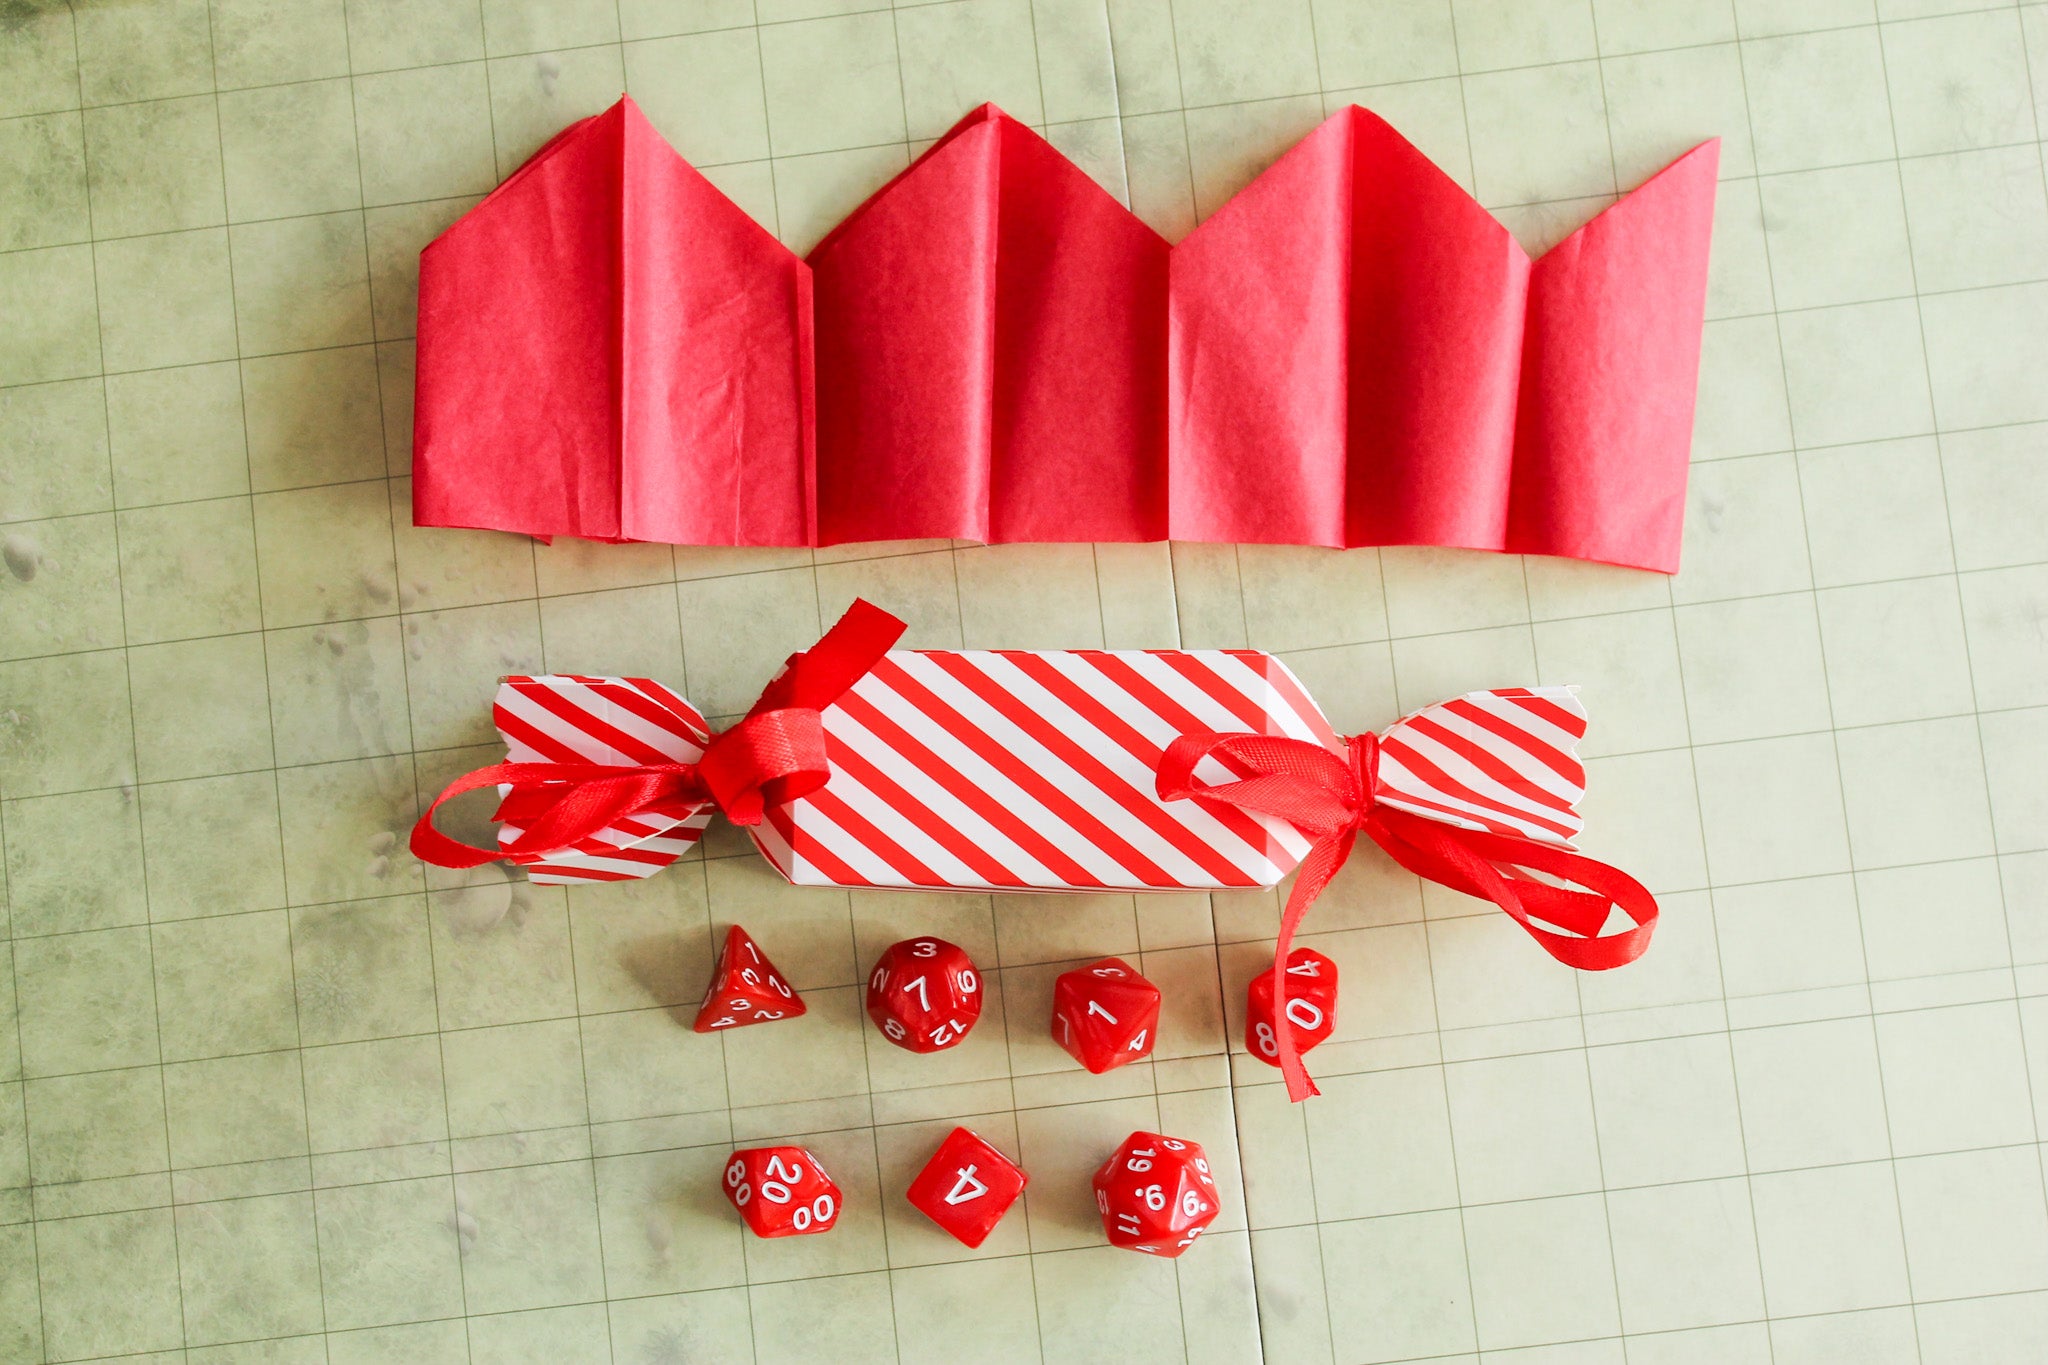 DnD Luxury Christmas Crackers with full set of dice - Mystery Dice Goblin